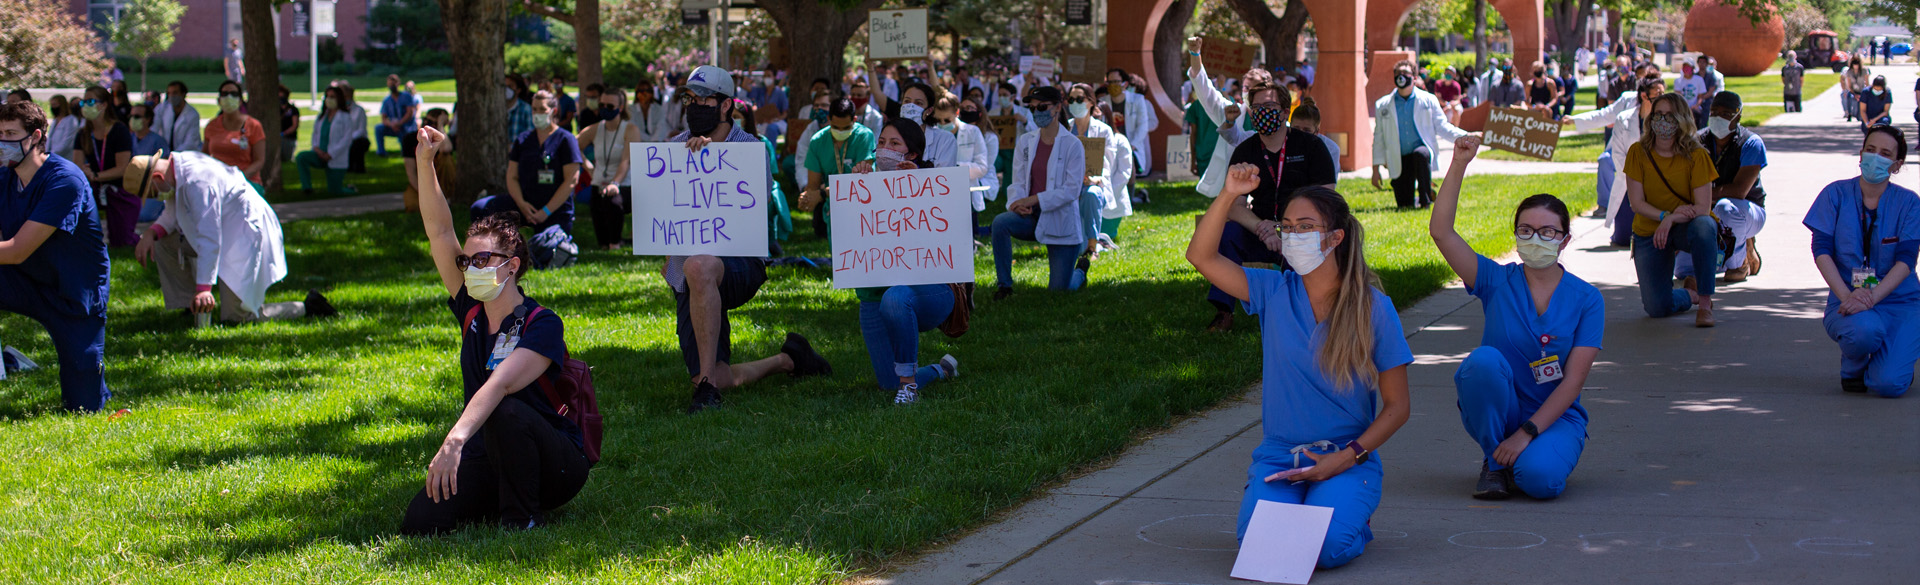 White Coats for Black Lives peaceful protest at CU Anschutz Medical Campus